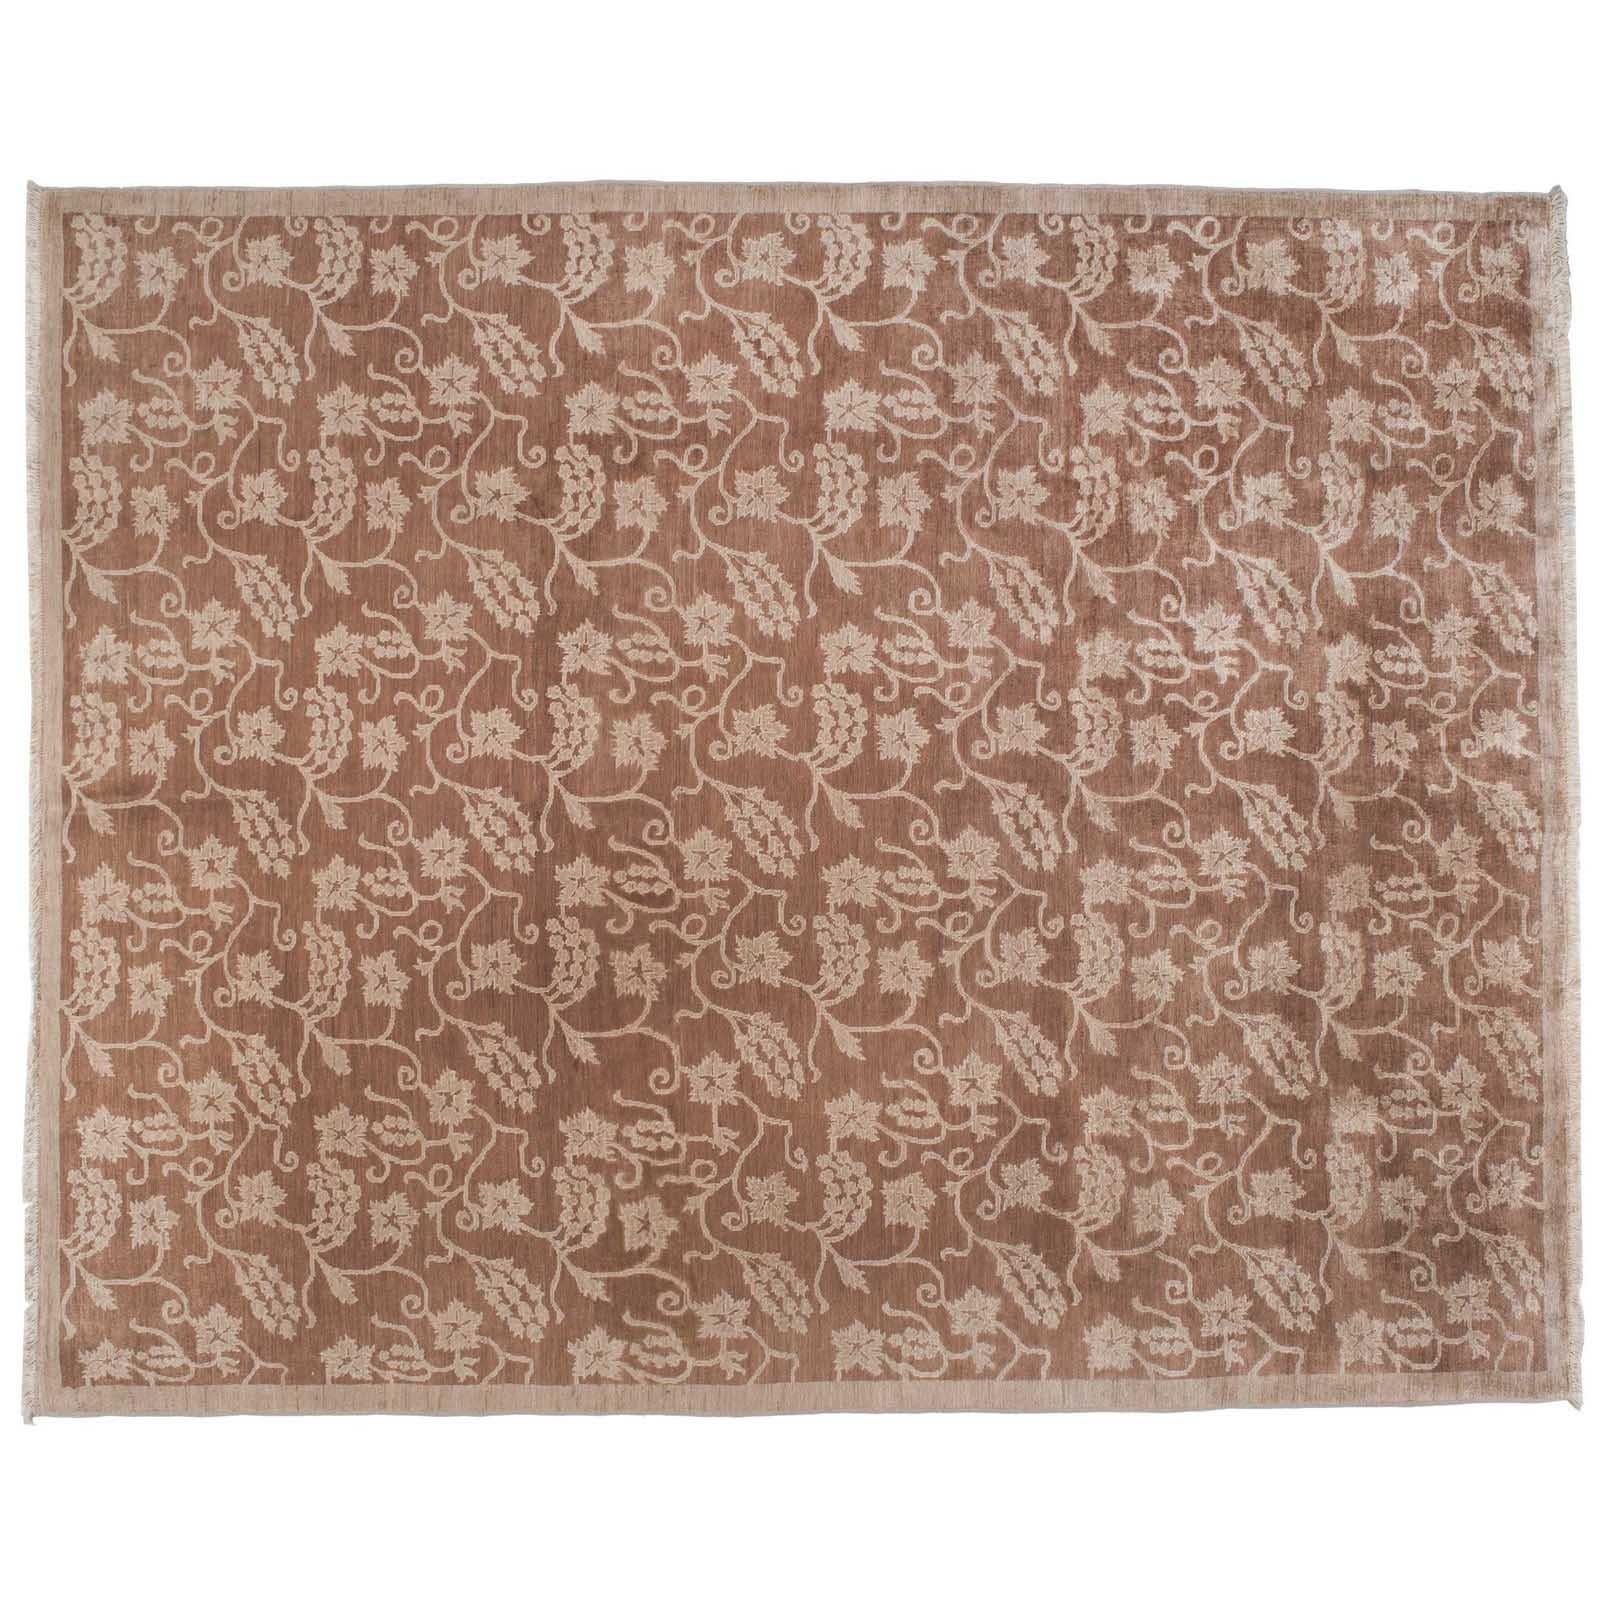 Floral All-Over Design Rug in Brown and Beige